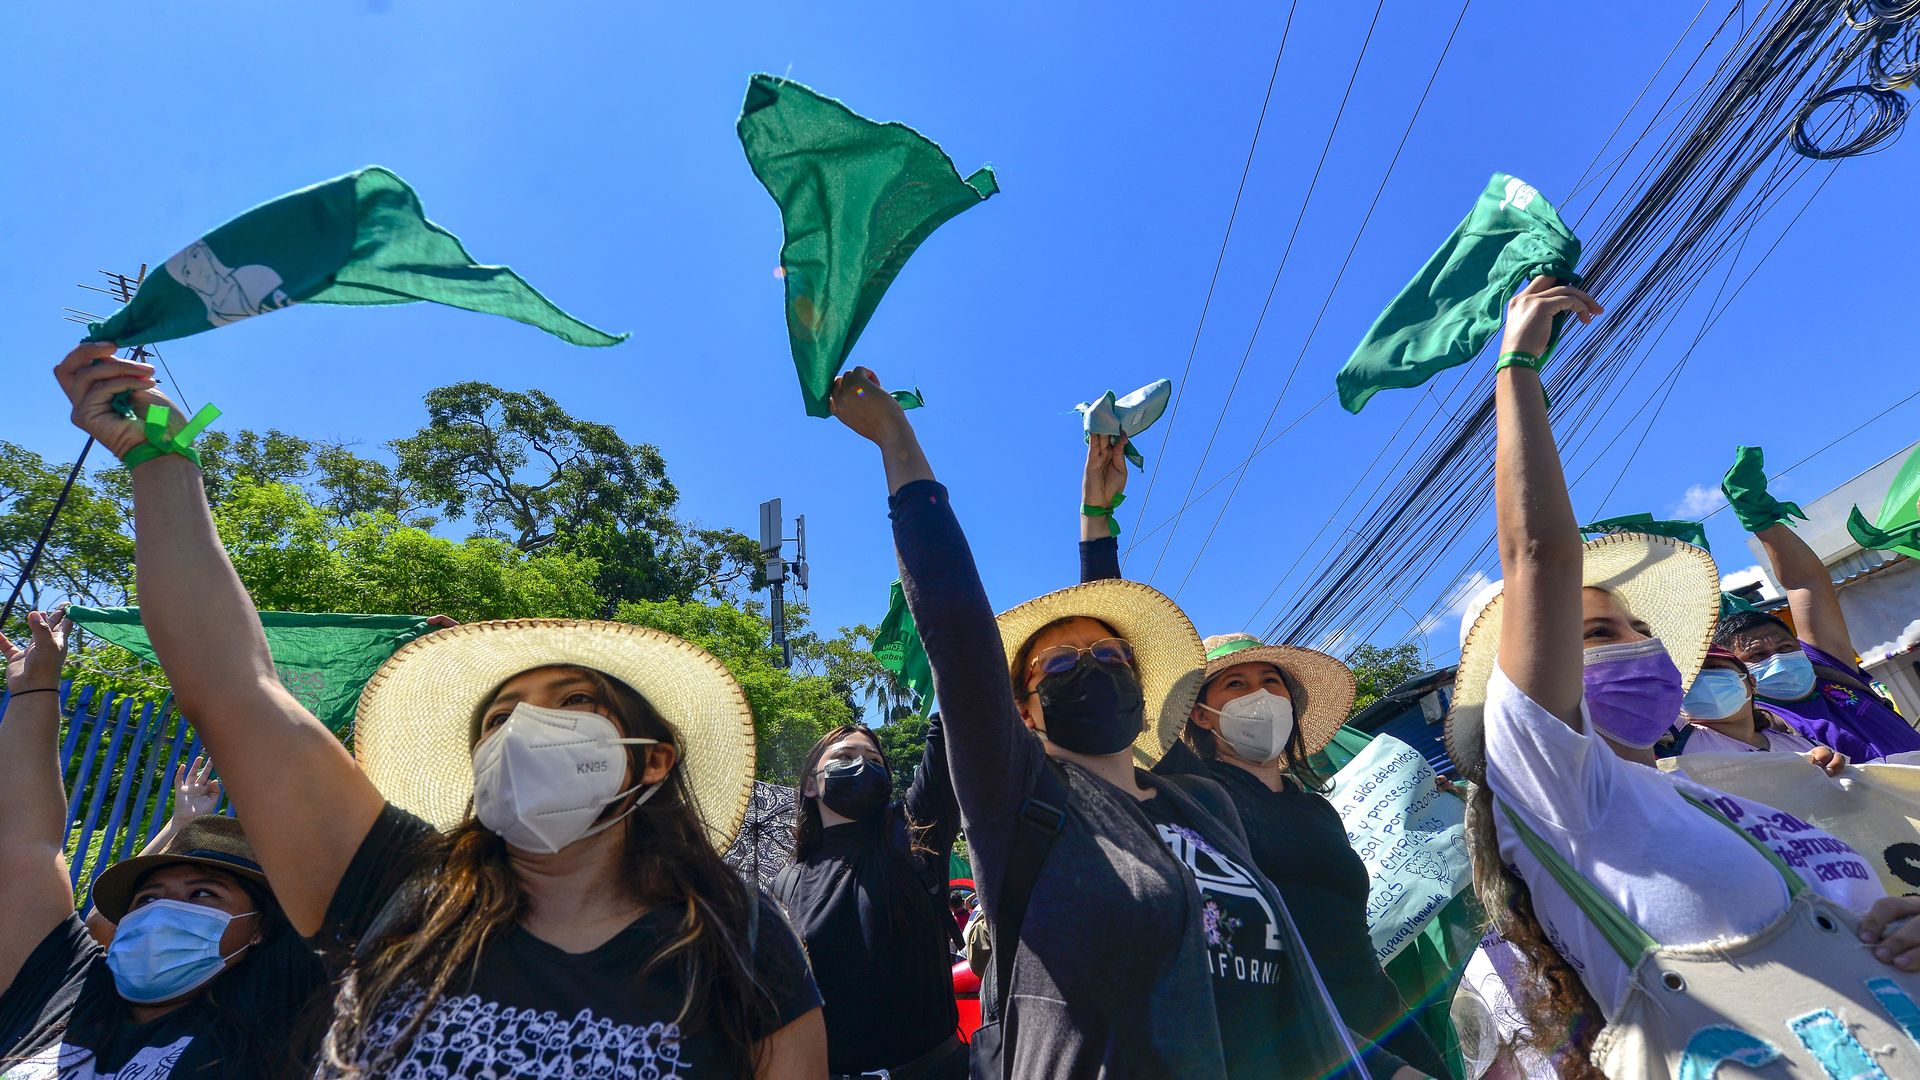 Women in El Salvador wave green flags while protesting for abortion rights outside against the backdrop of a bright blue sky. 